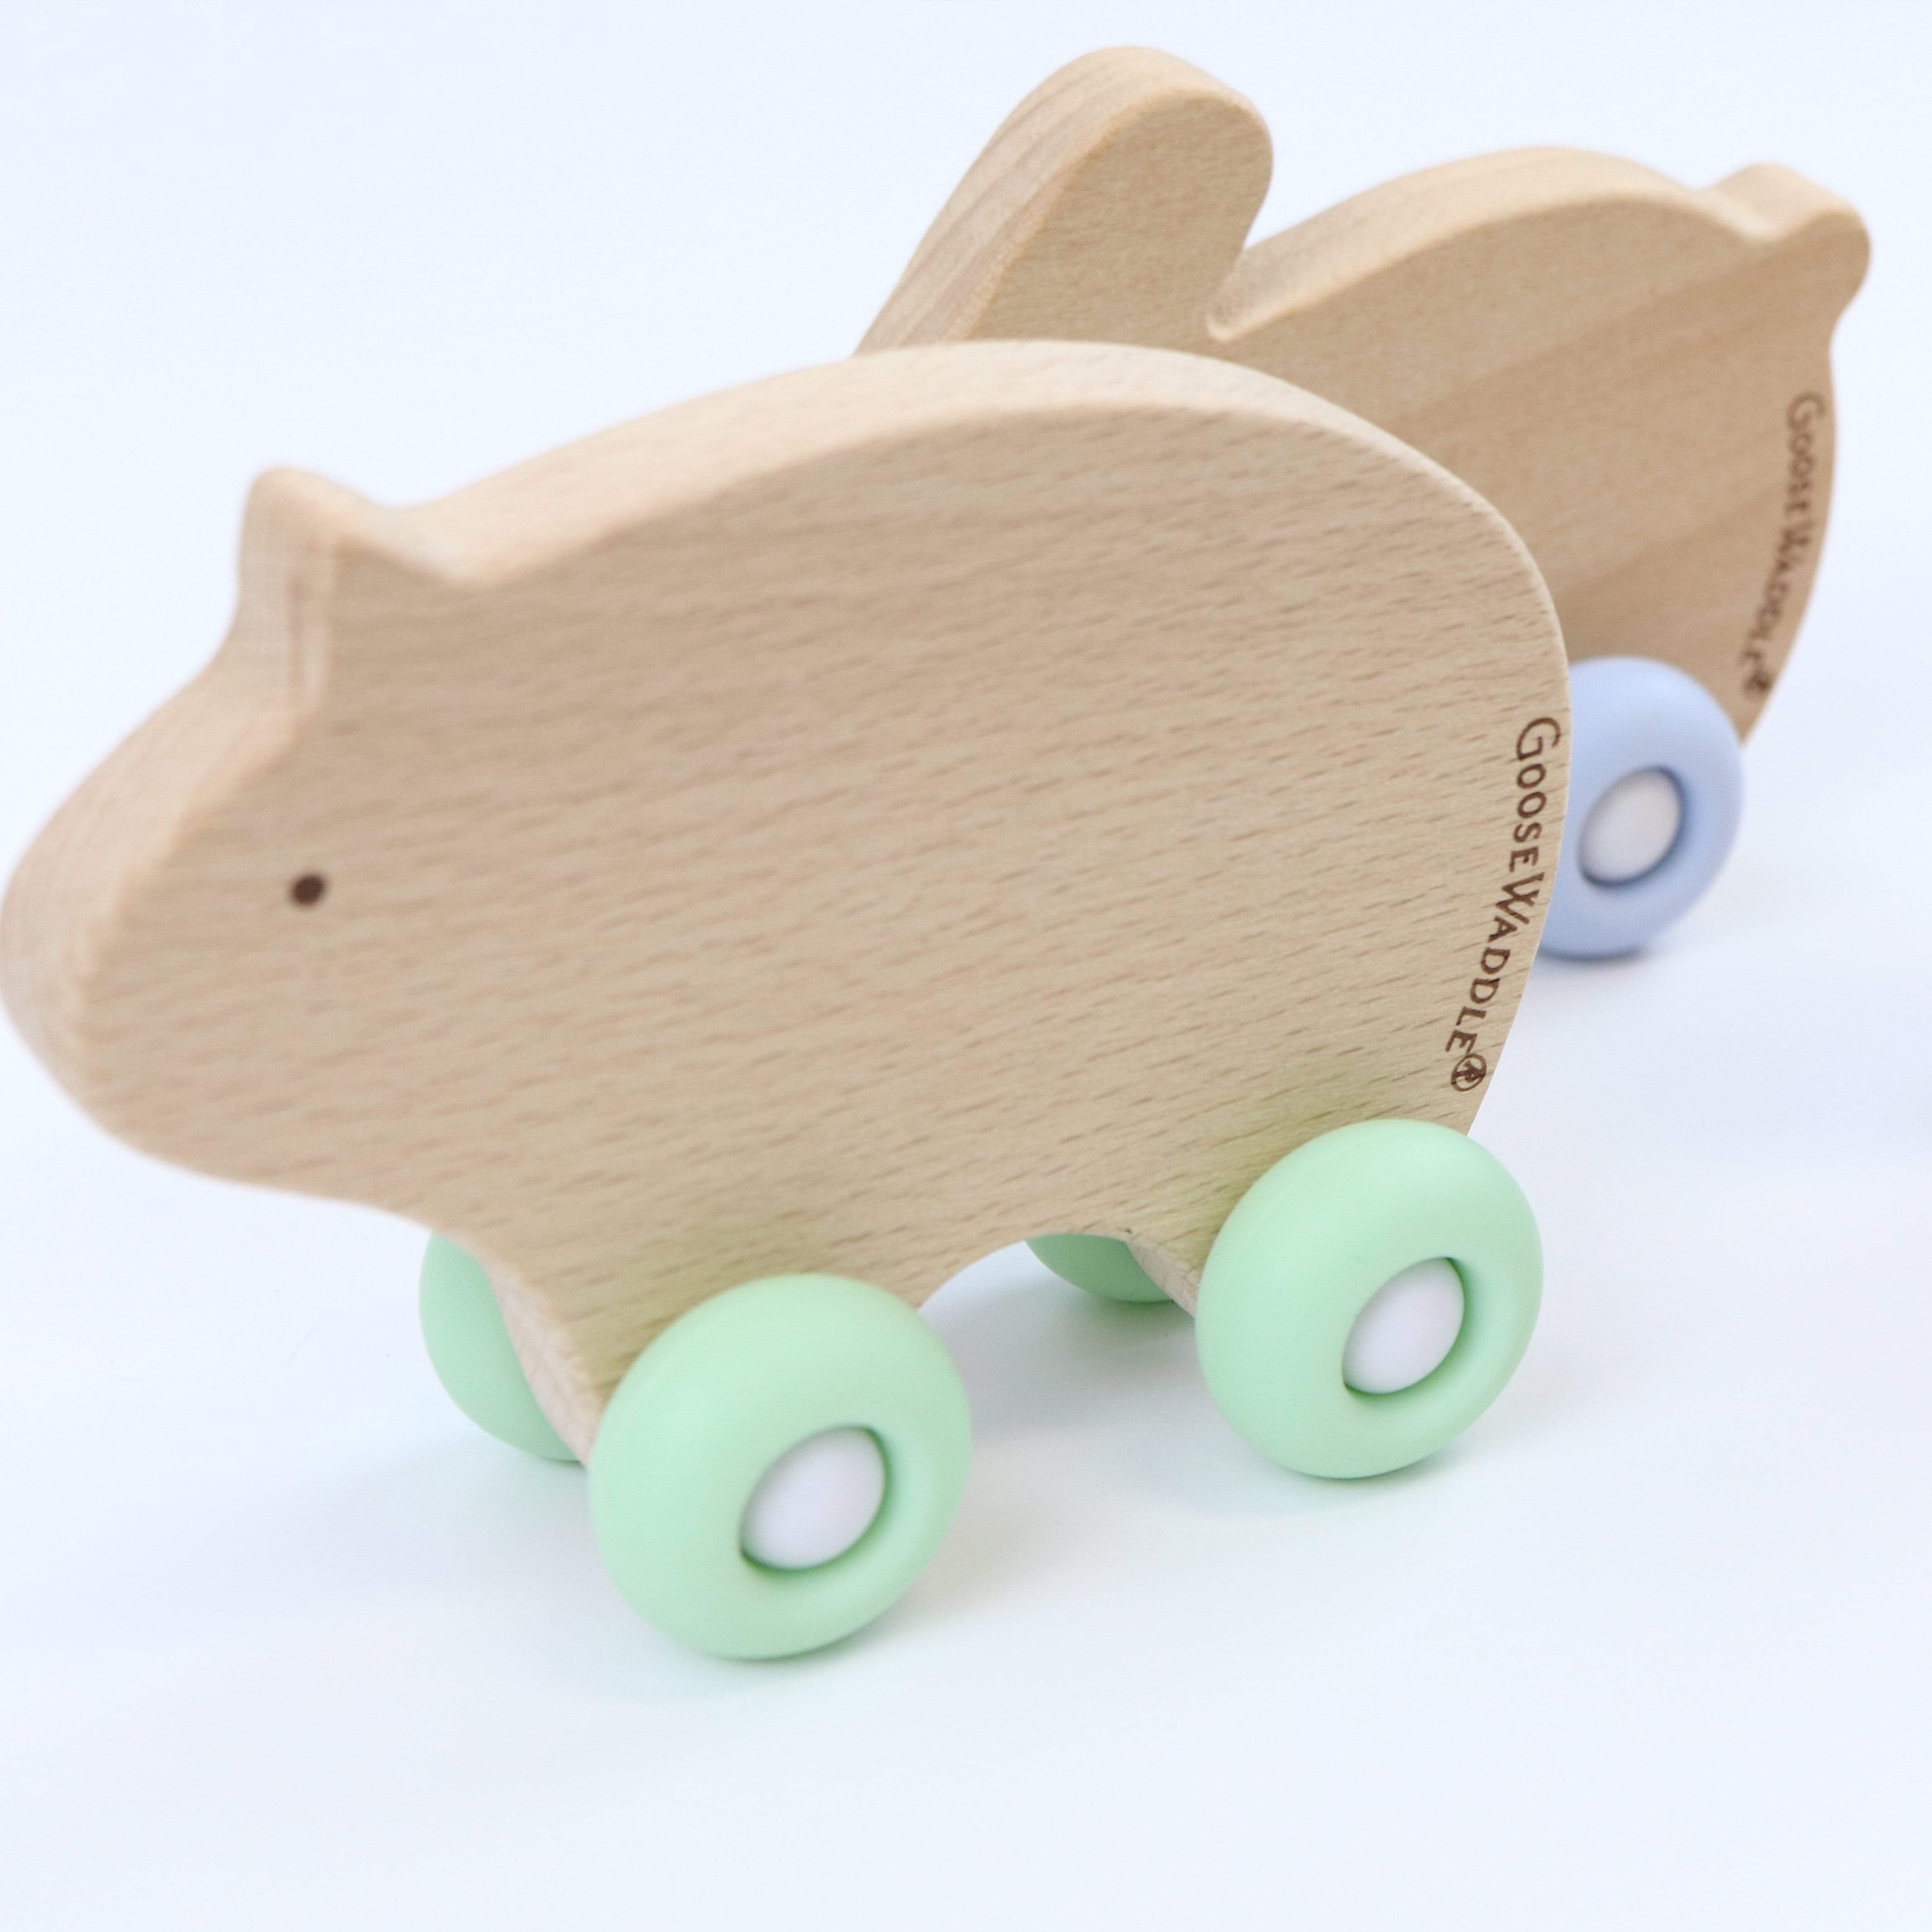 Mint Bear Silicone + Wood Teether With Wheels